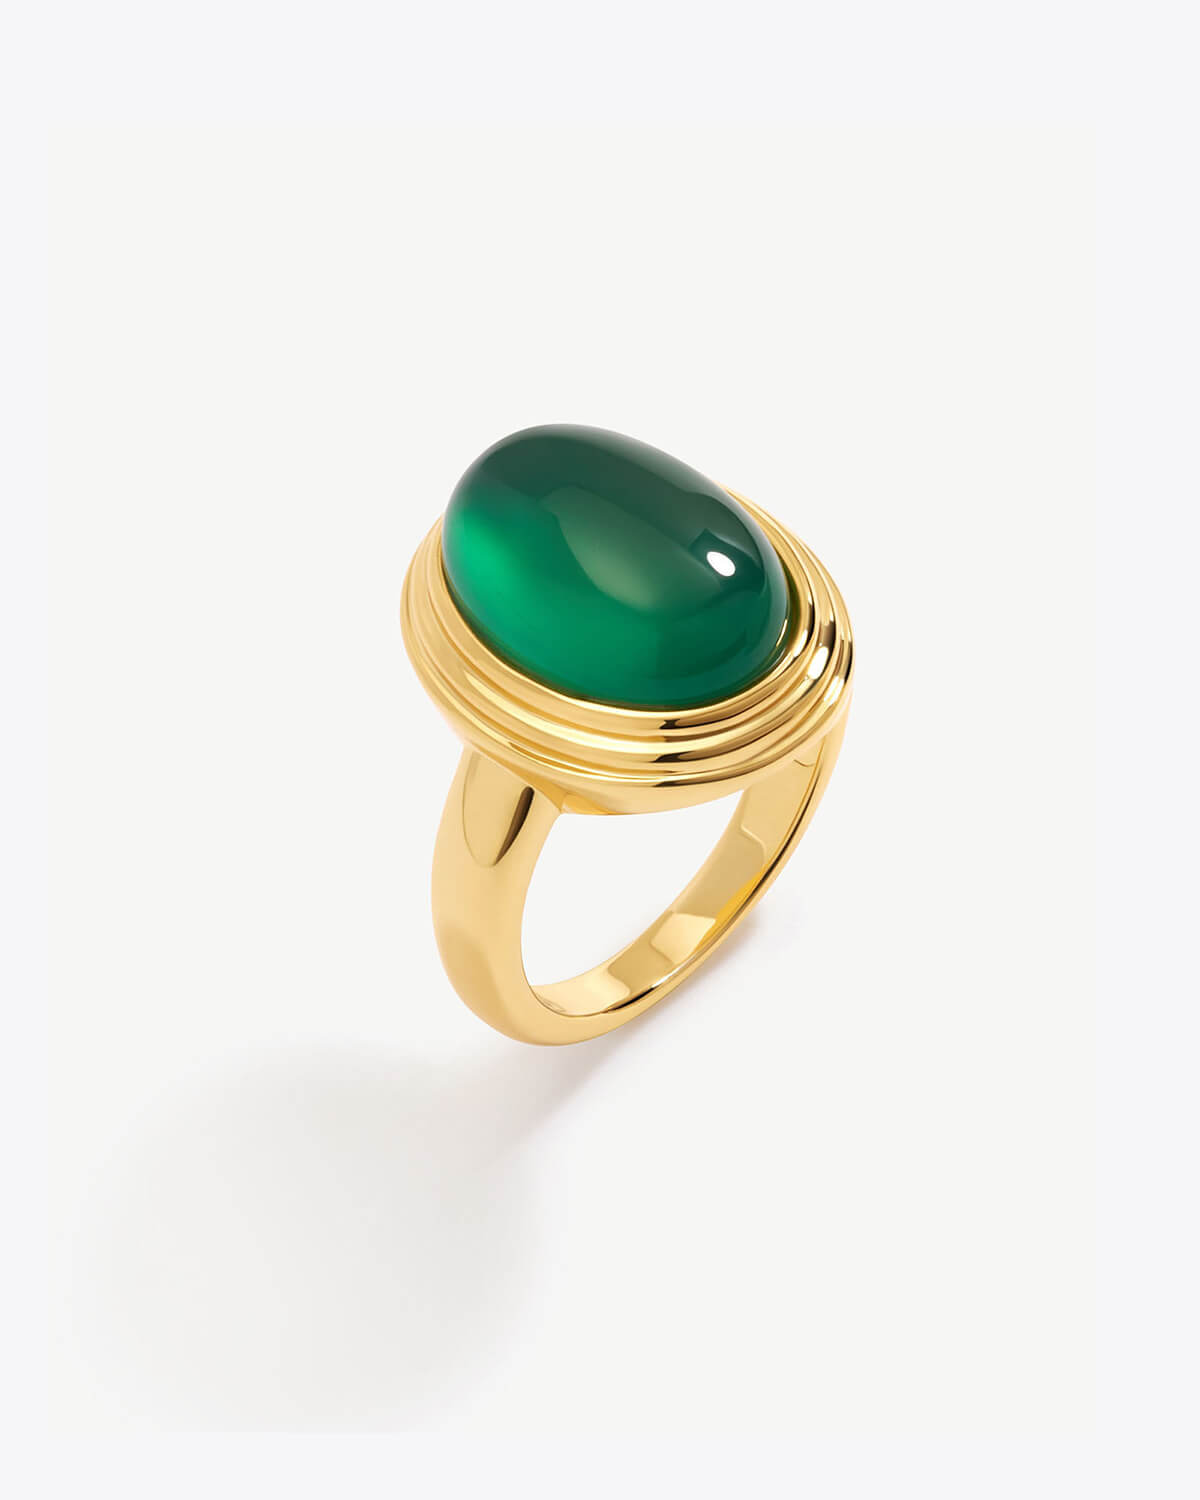 a gold ring with a green stone